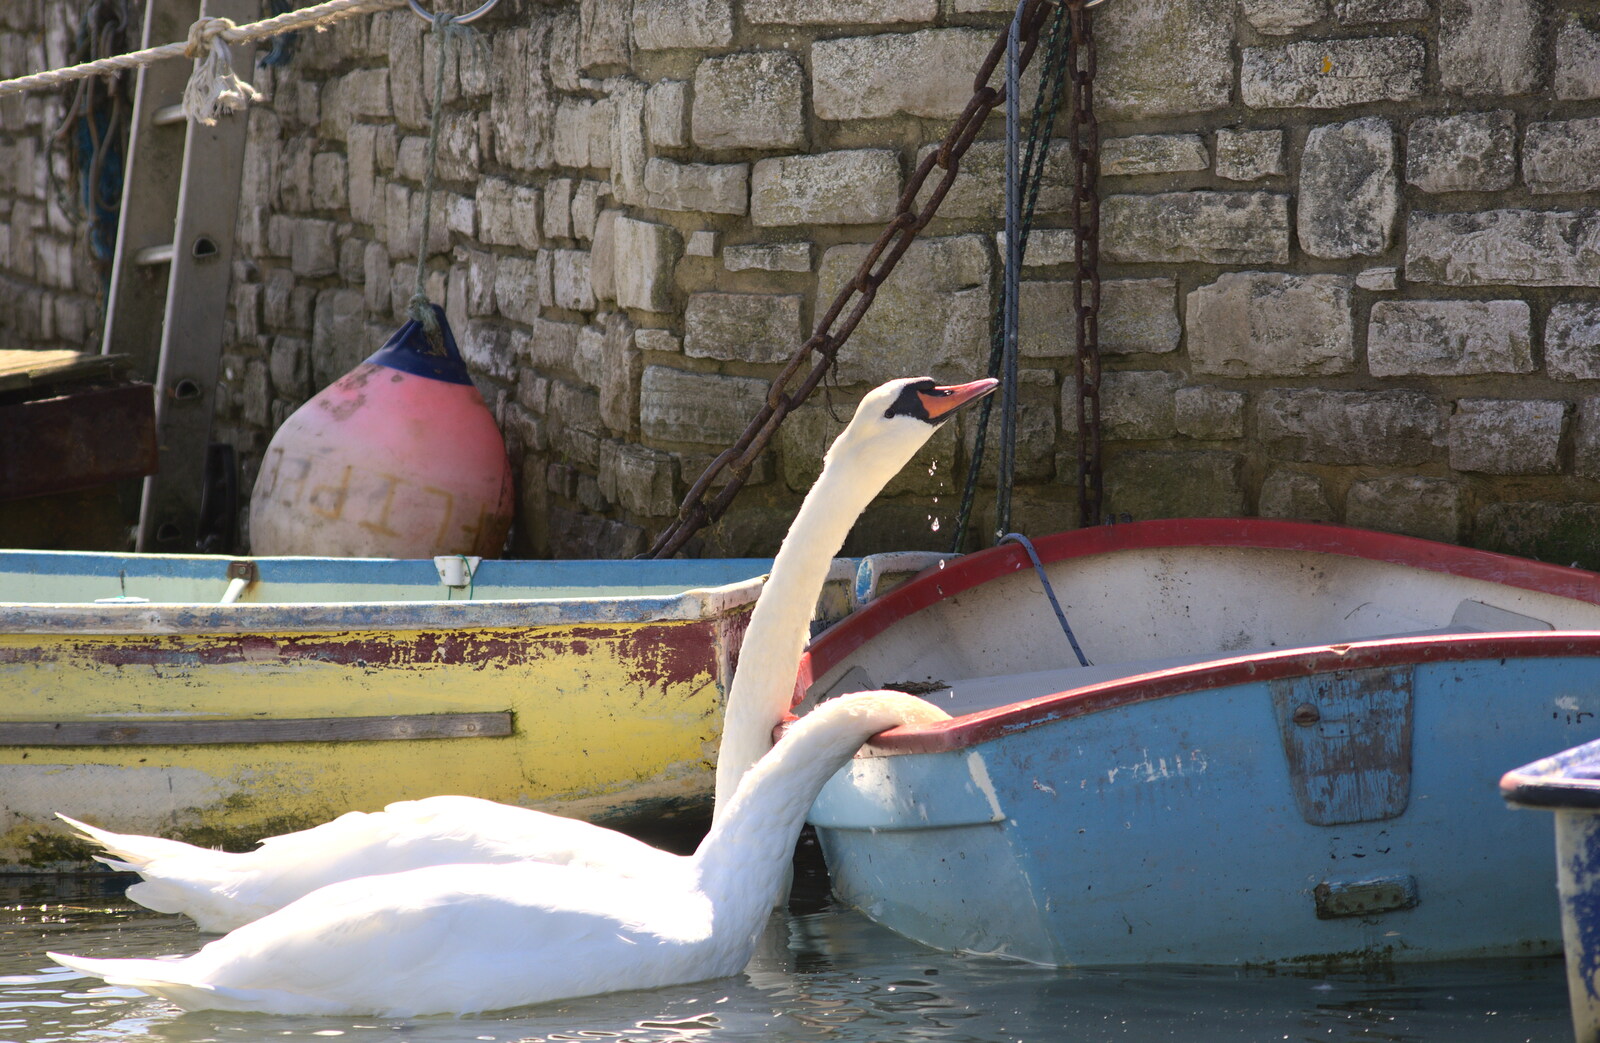 Swans drink fresh water from a boat from A Trip to Hurst Castle, Keyhaven, Hampshire - 28th August 2015